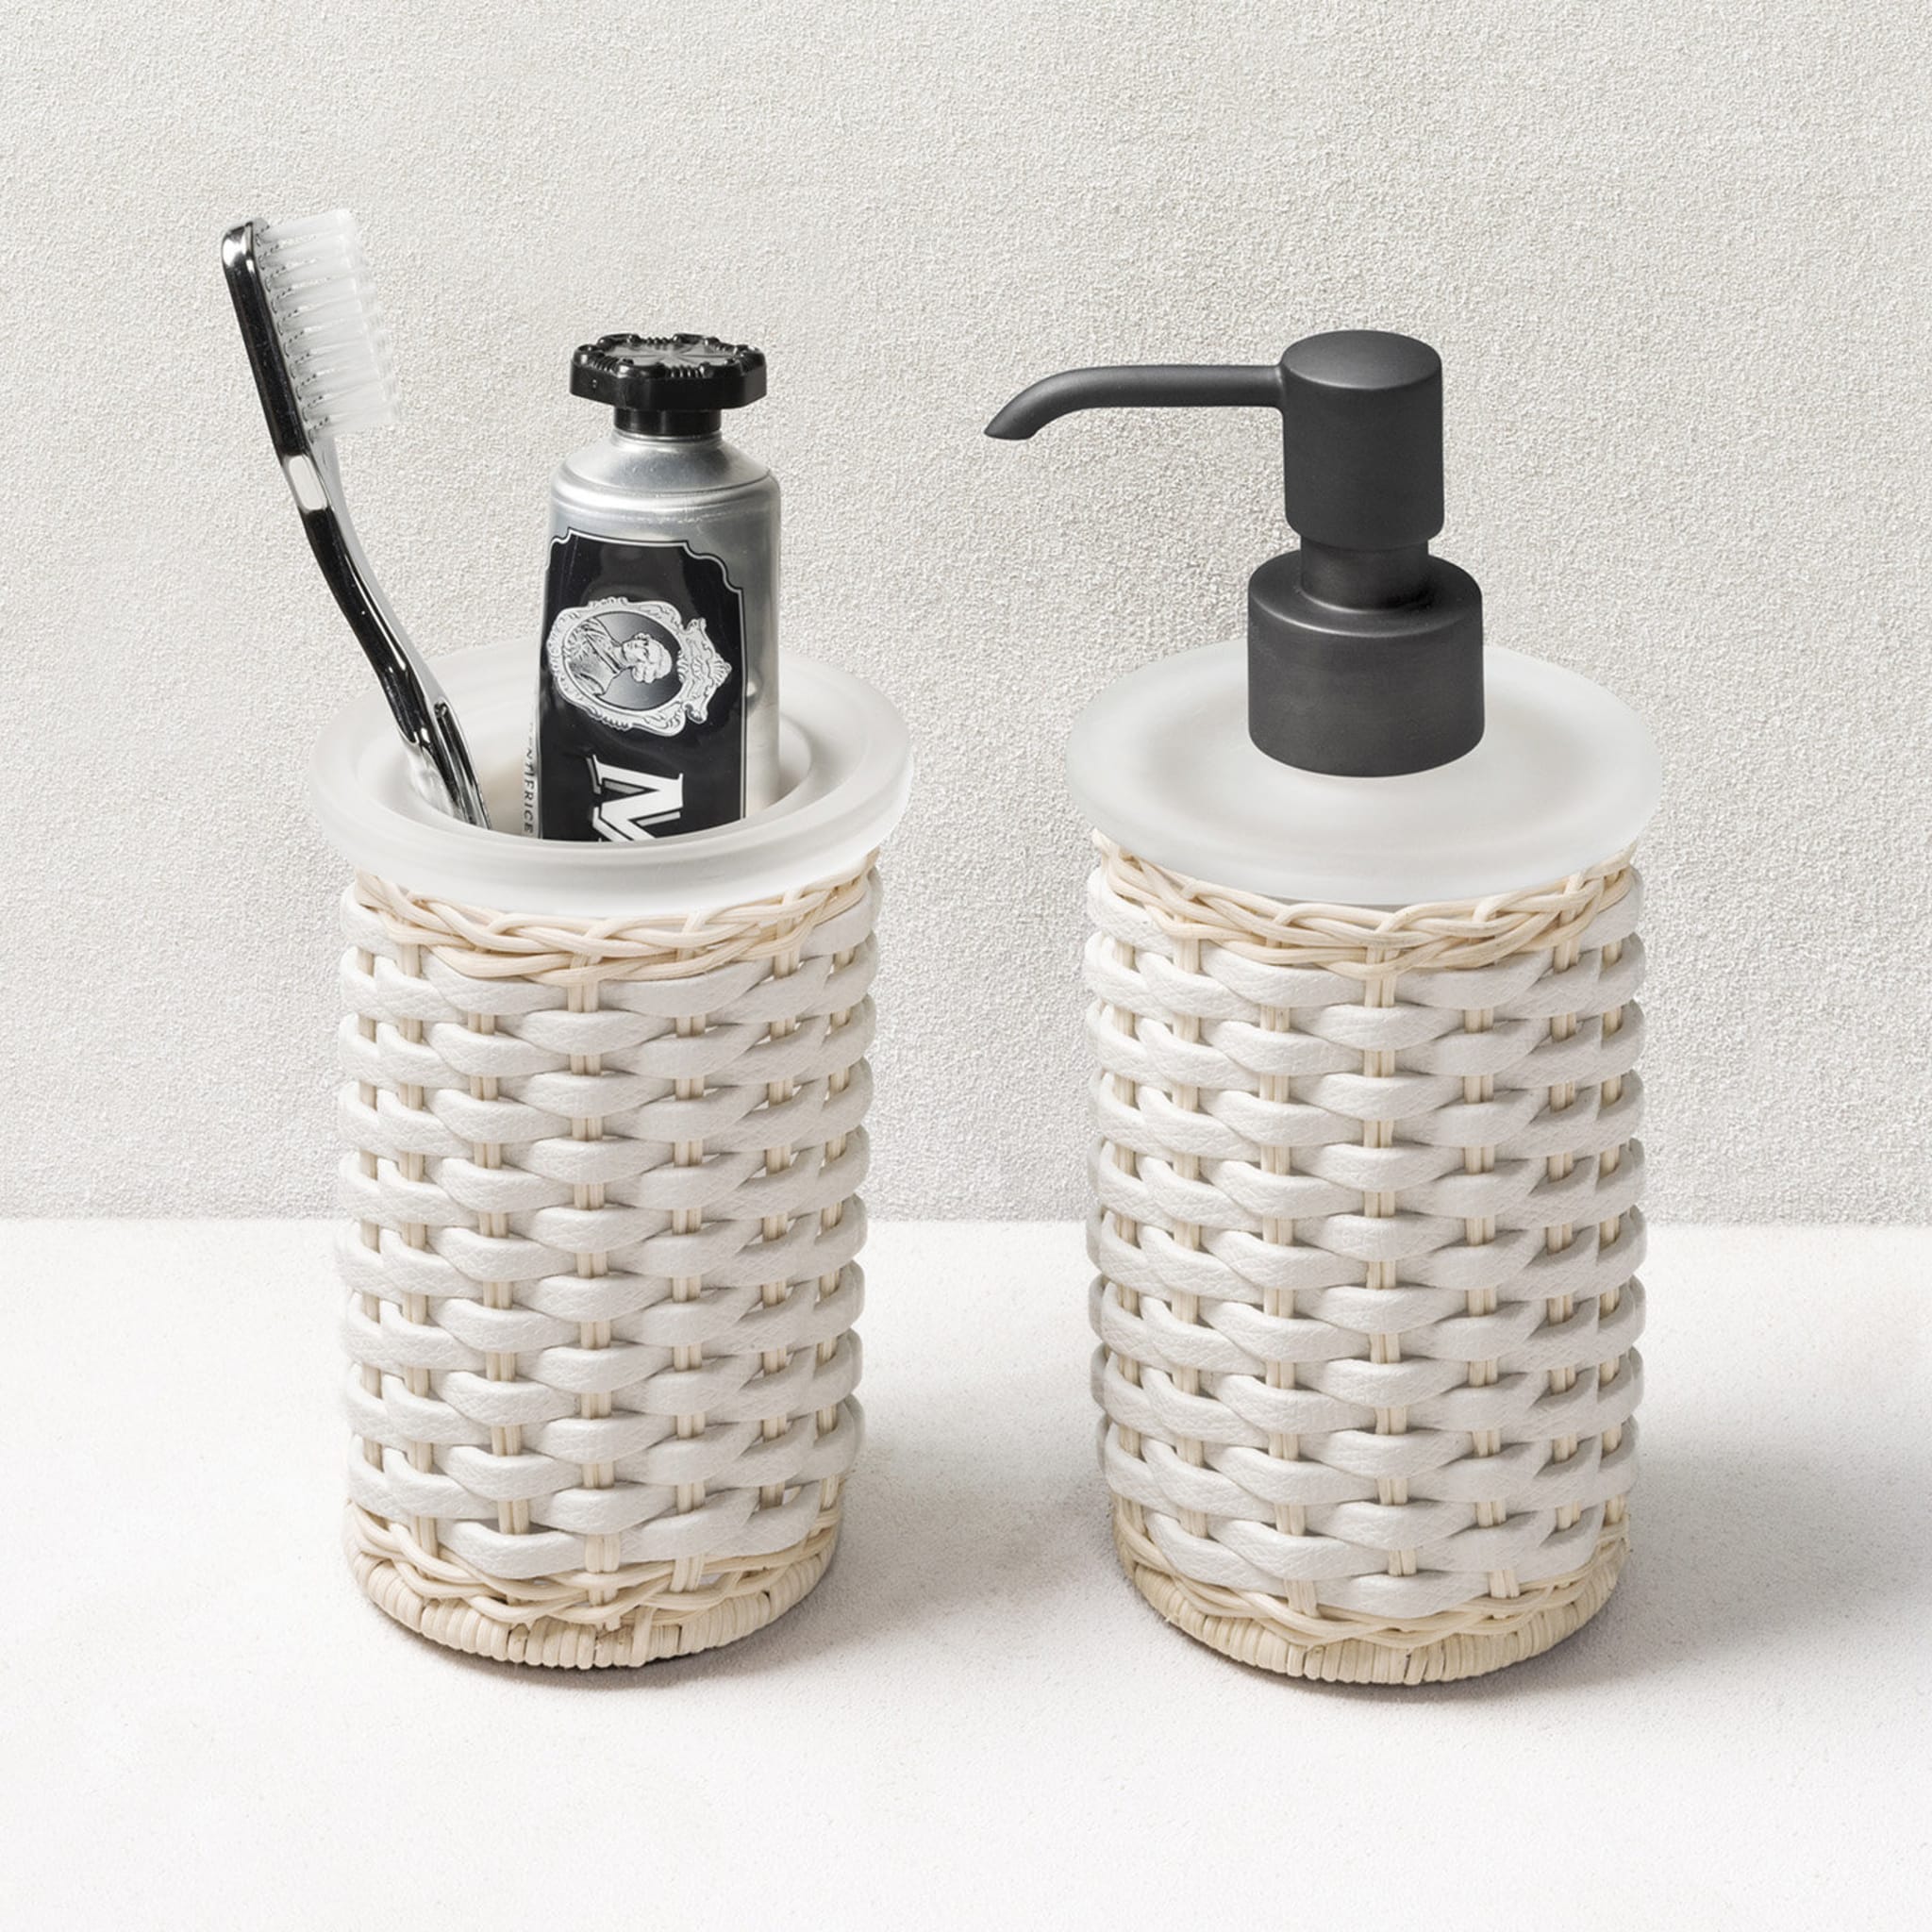 Calais White Leather & Rattan Soap Dispenser and Toothbrush Holder - Alternative view 1